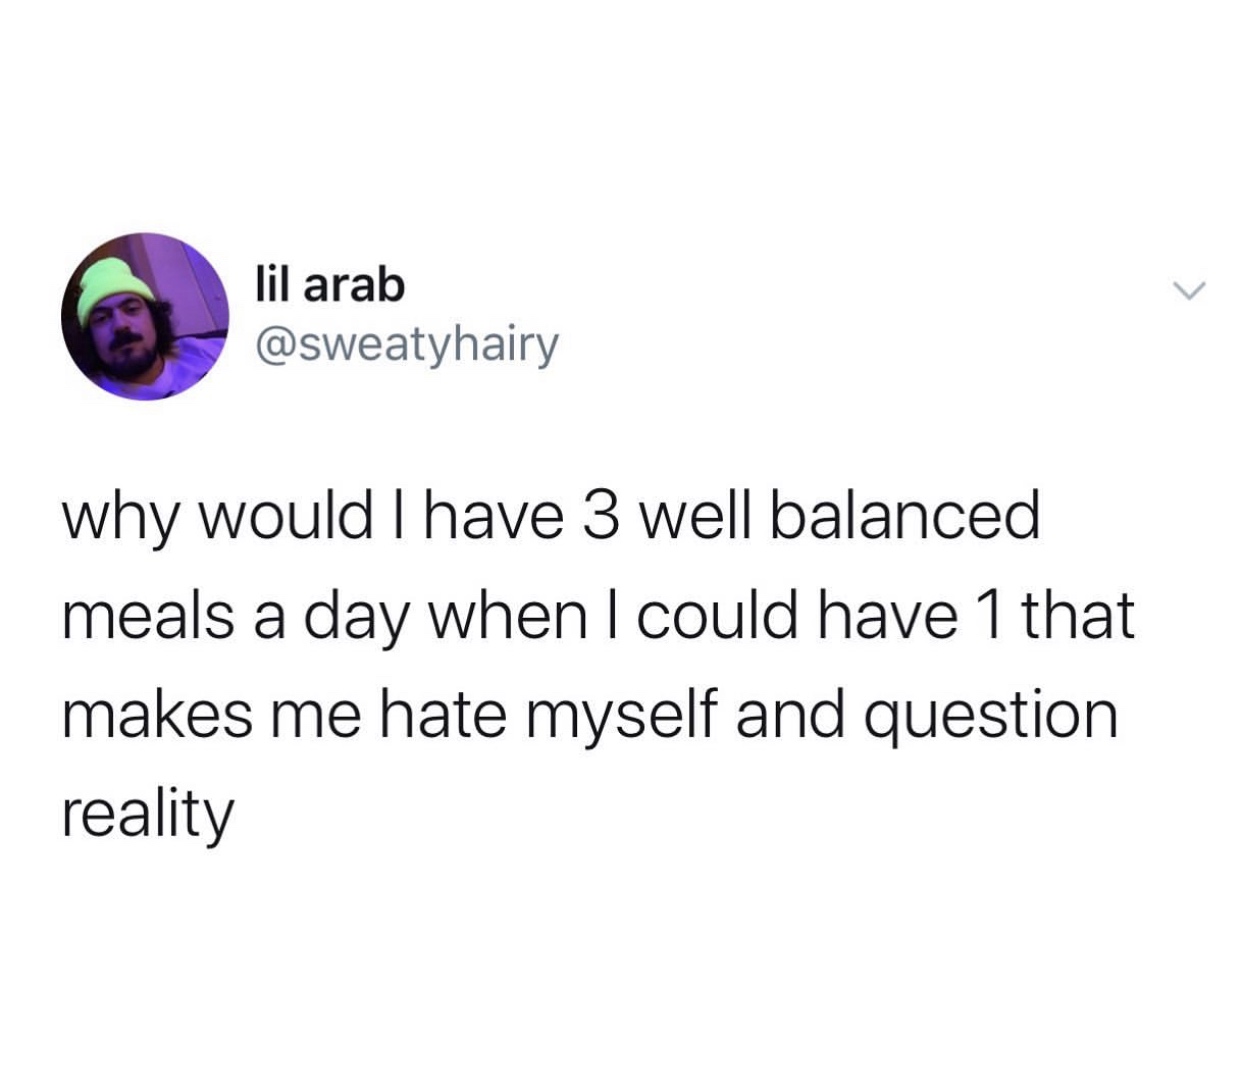 people who overthink also overlove - lil arab why would I have 3 well balanced meals a day when I could have 1 that makes me hate myself and question reality